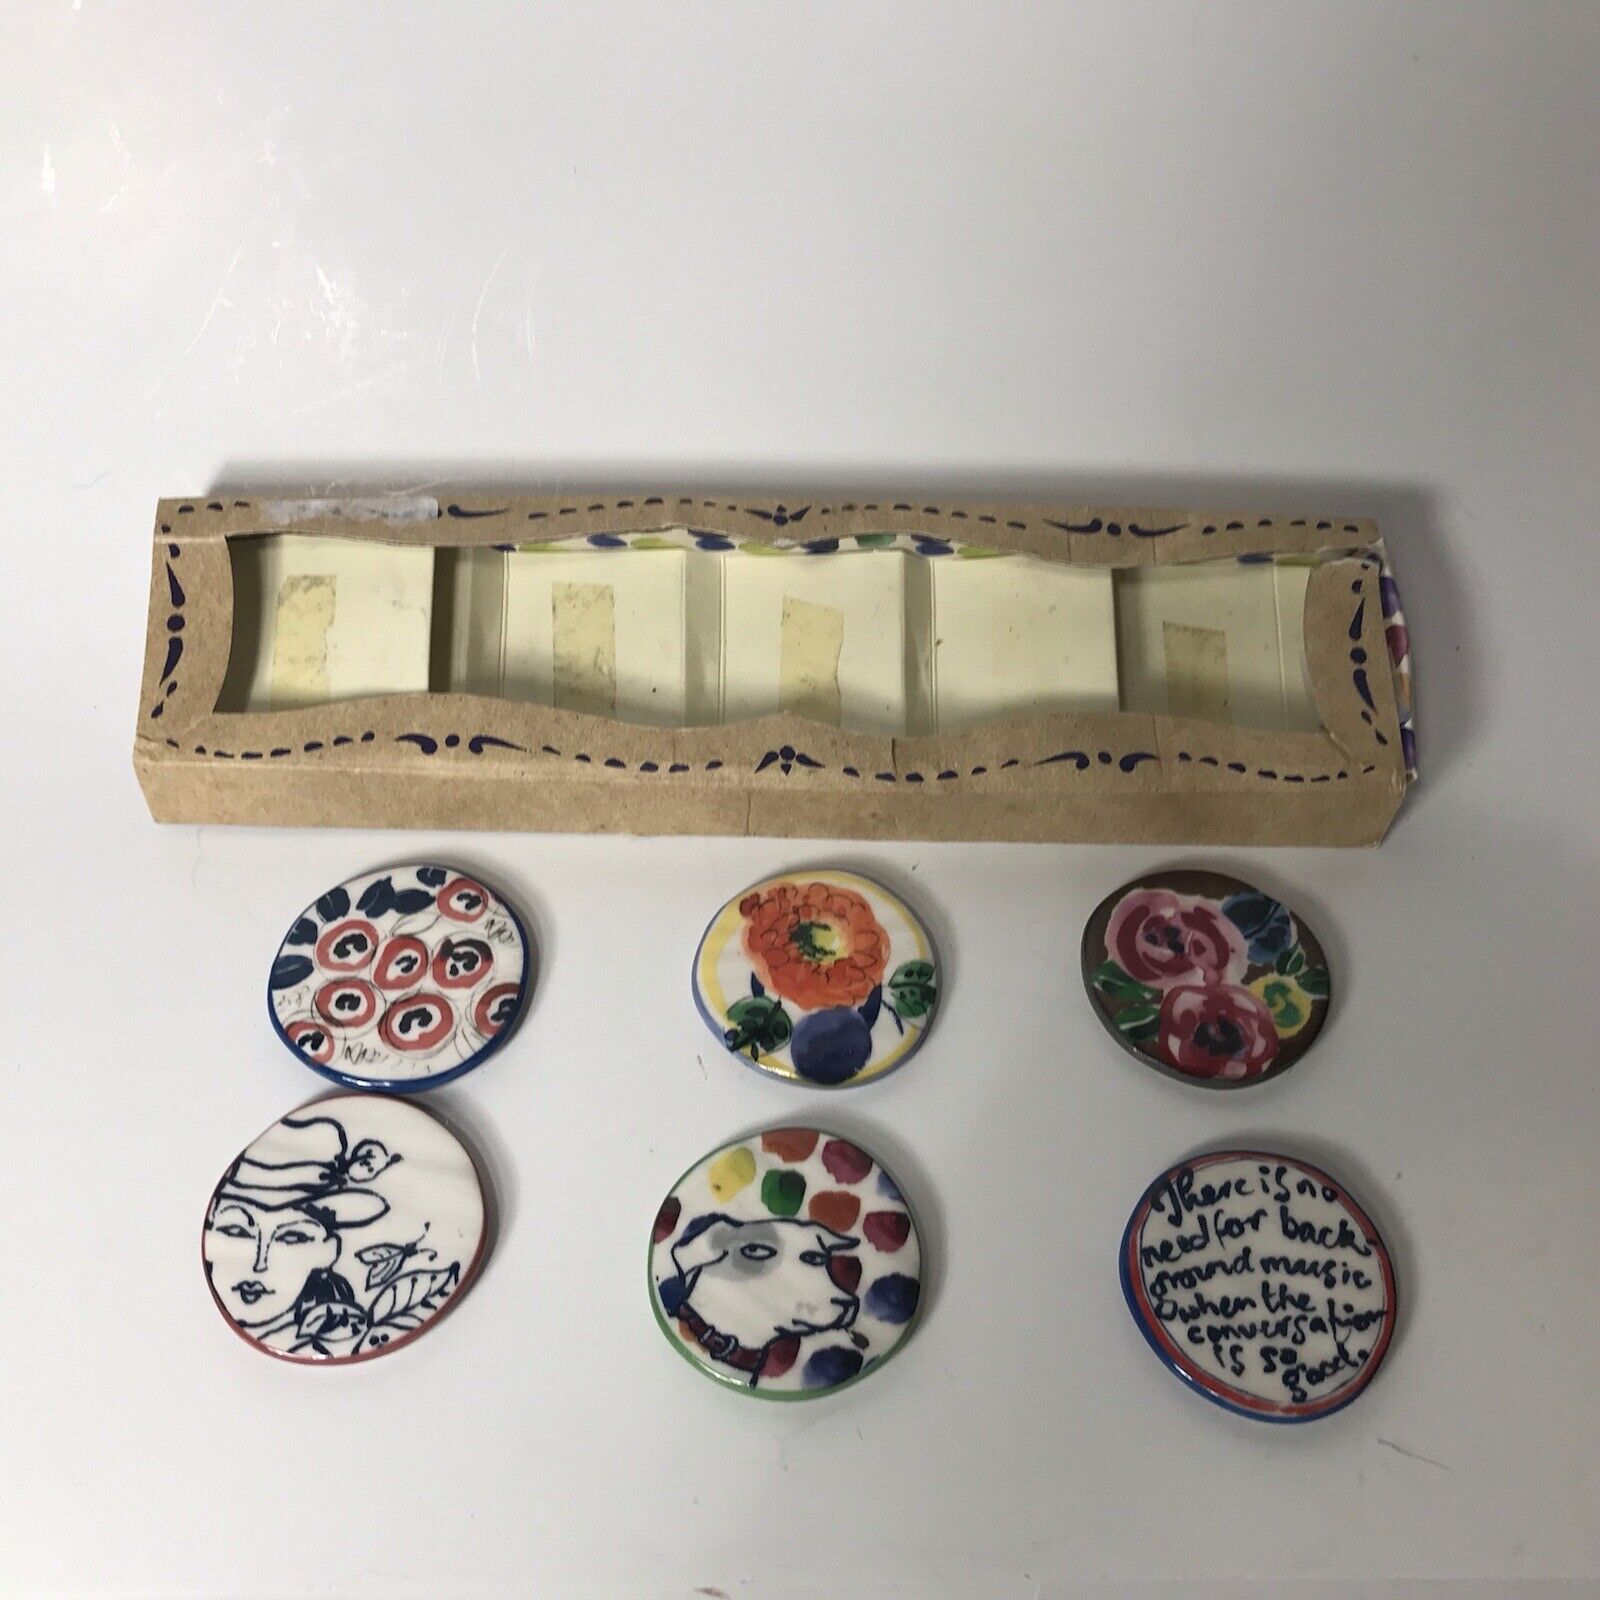 Anthropologie Moments Painted Pottery Refrigerator Magnets Set of 6 Dog Floral